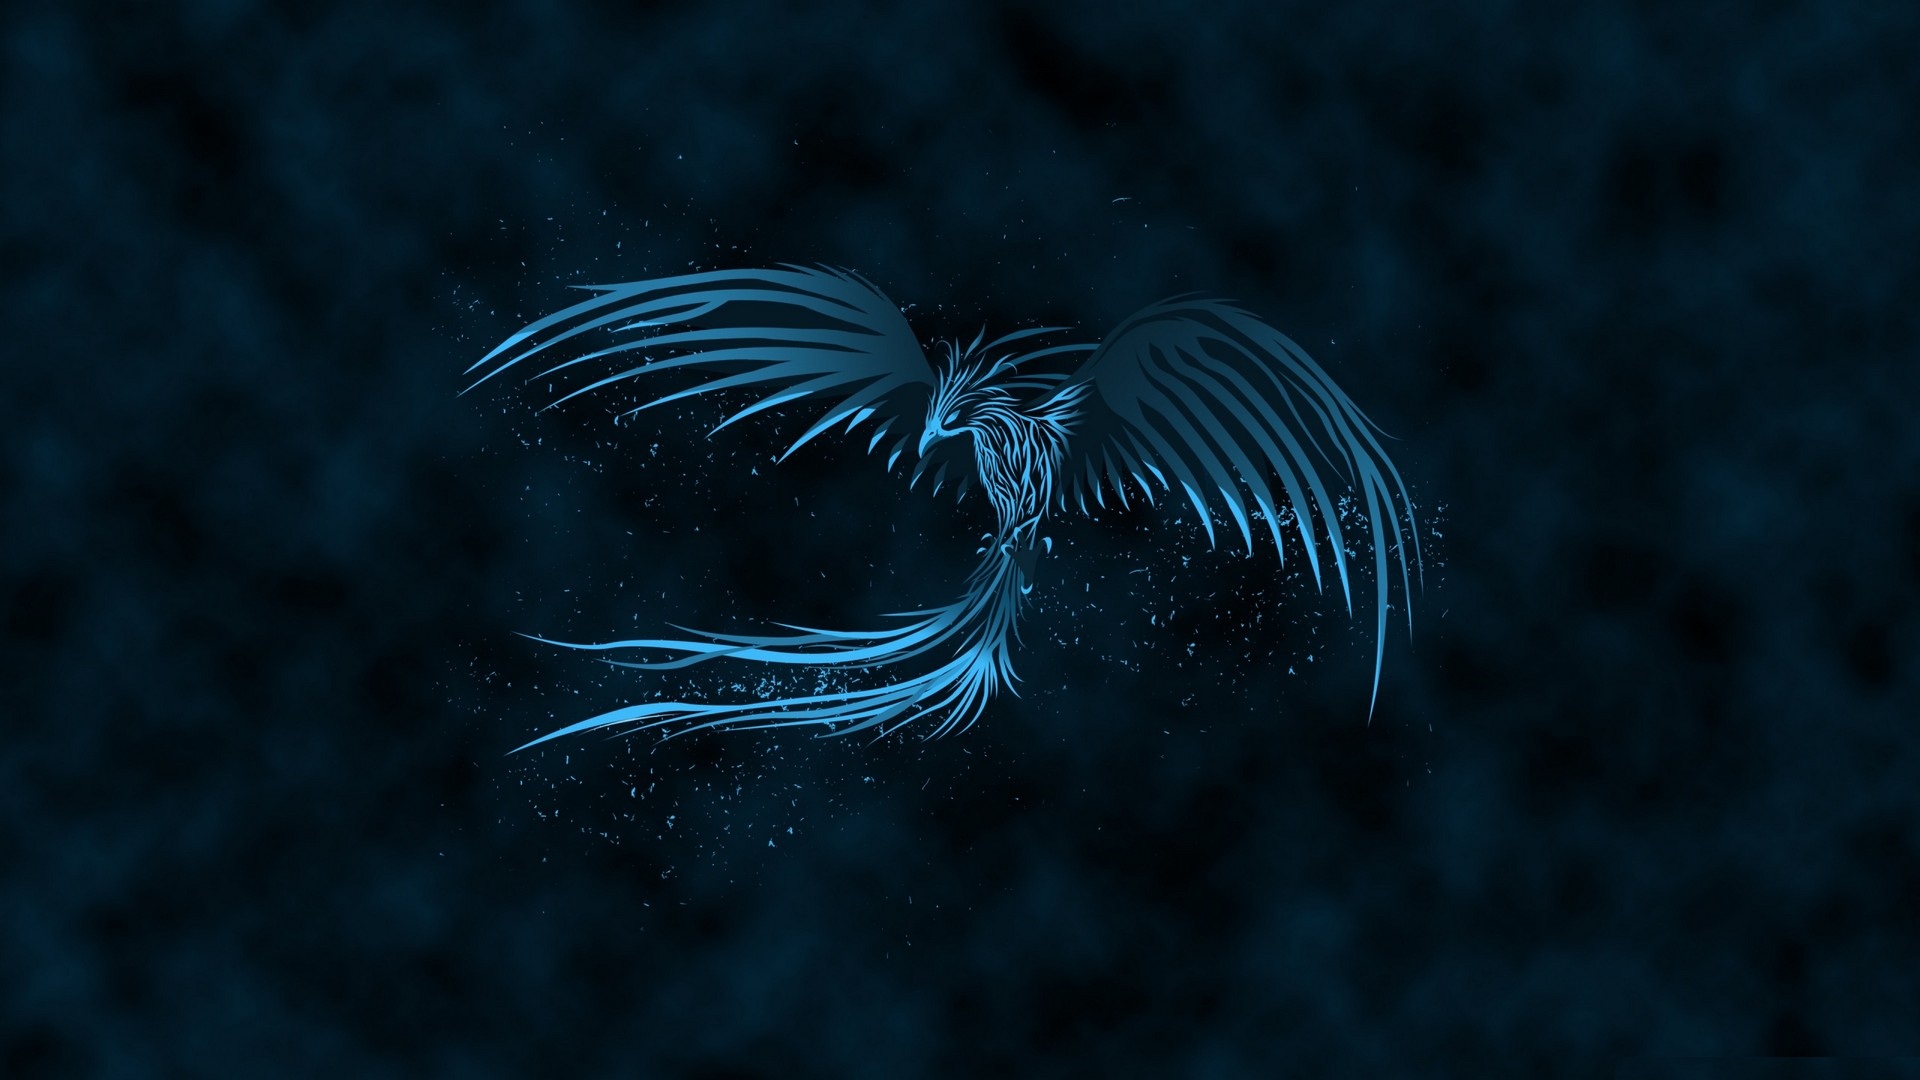 Ice Phoenix Desktop Backgrounds with image resolution 1920x1080 pixel. You can make this wallpaper for your Desktop Computer Backgrounds, Mac Wallpapers, Android Lock screen or iPhone Screensavers